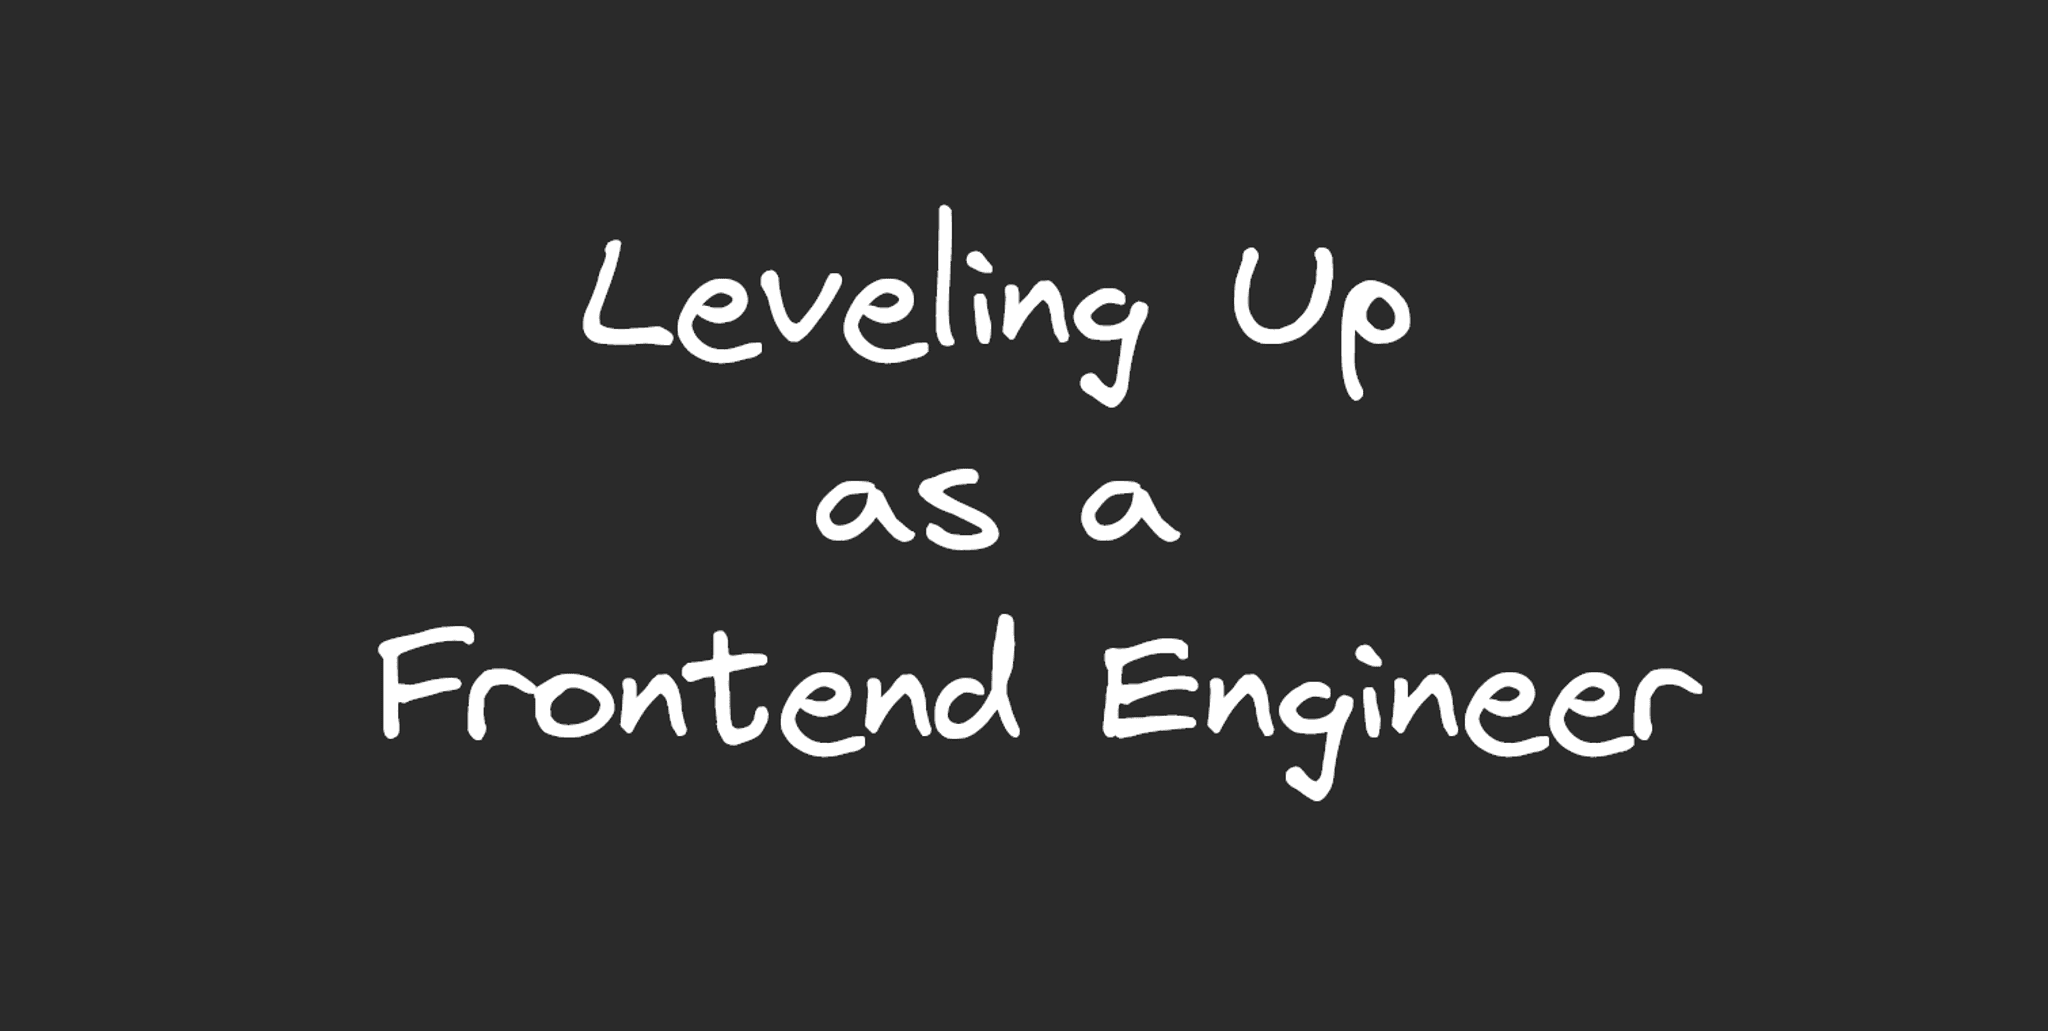 An image with the text "Leveling Up as a Frontend Engineer" at the center.